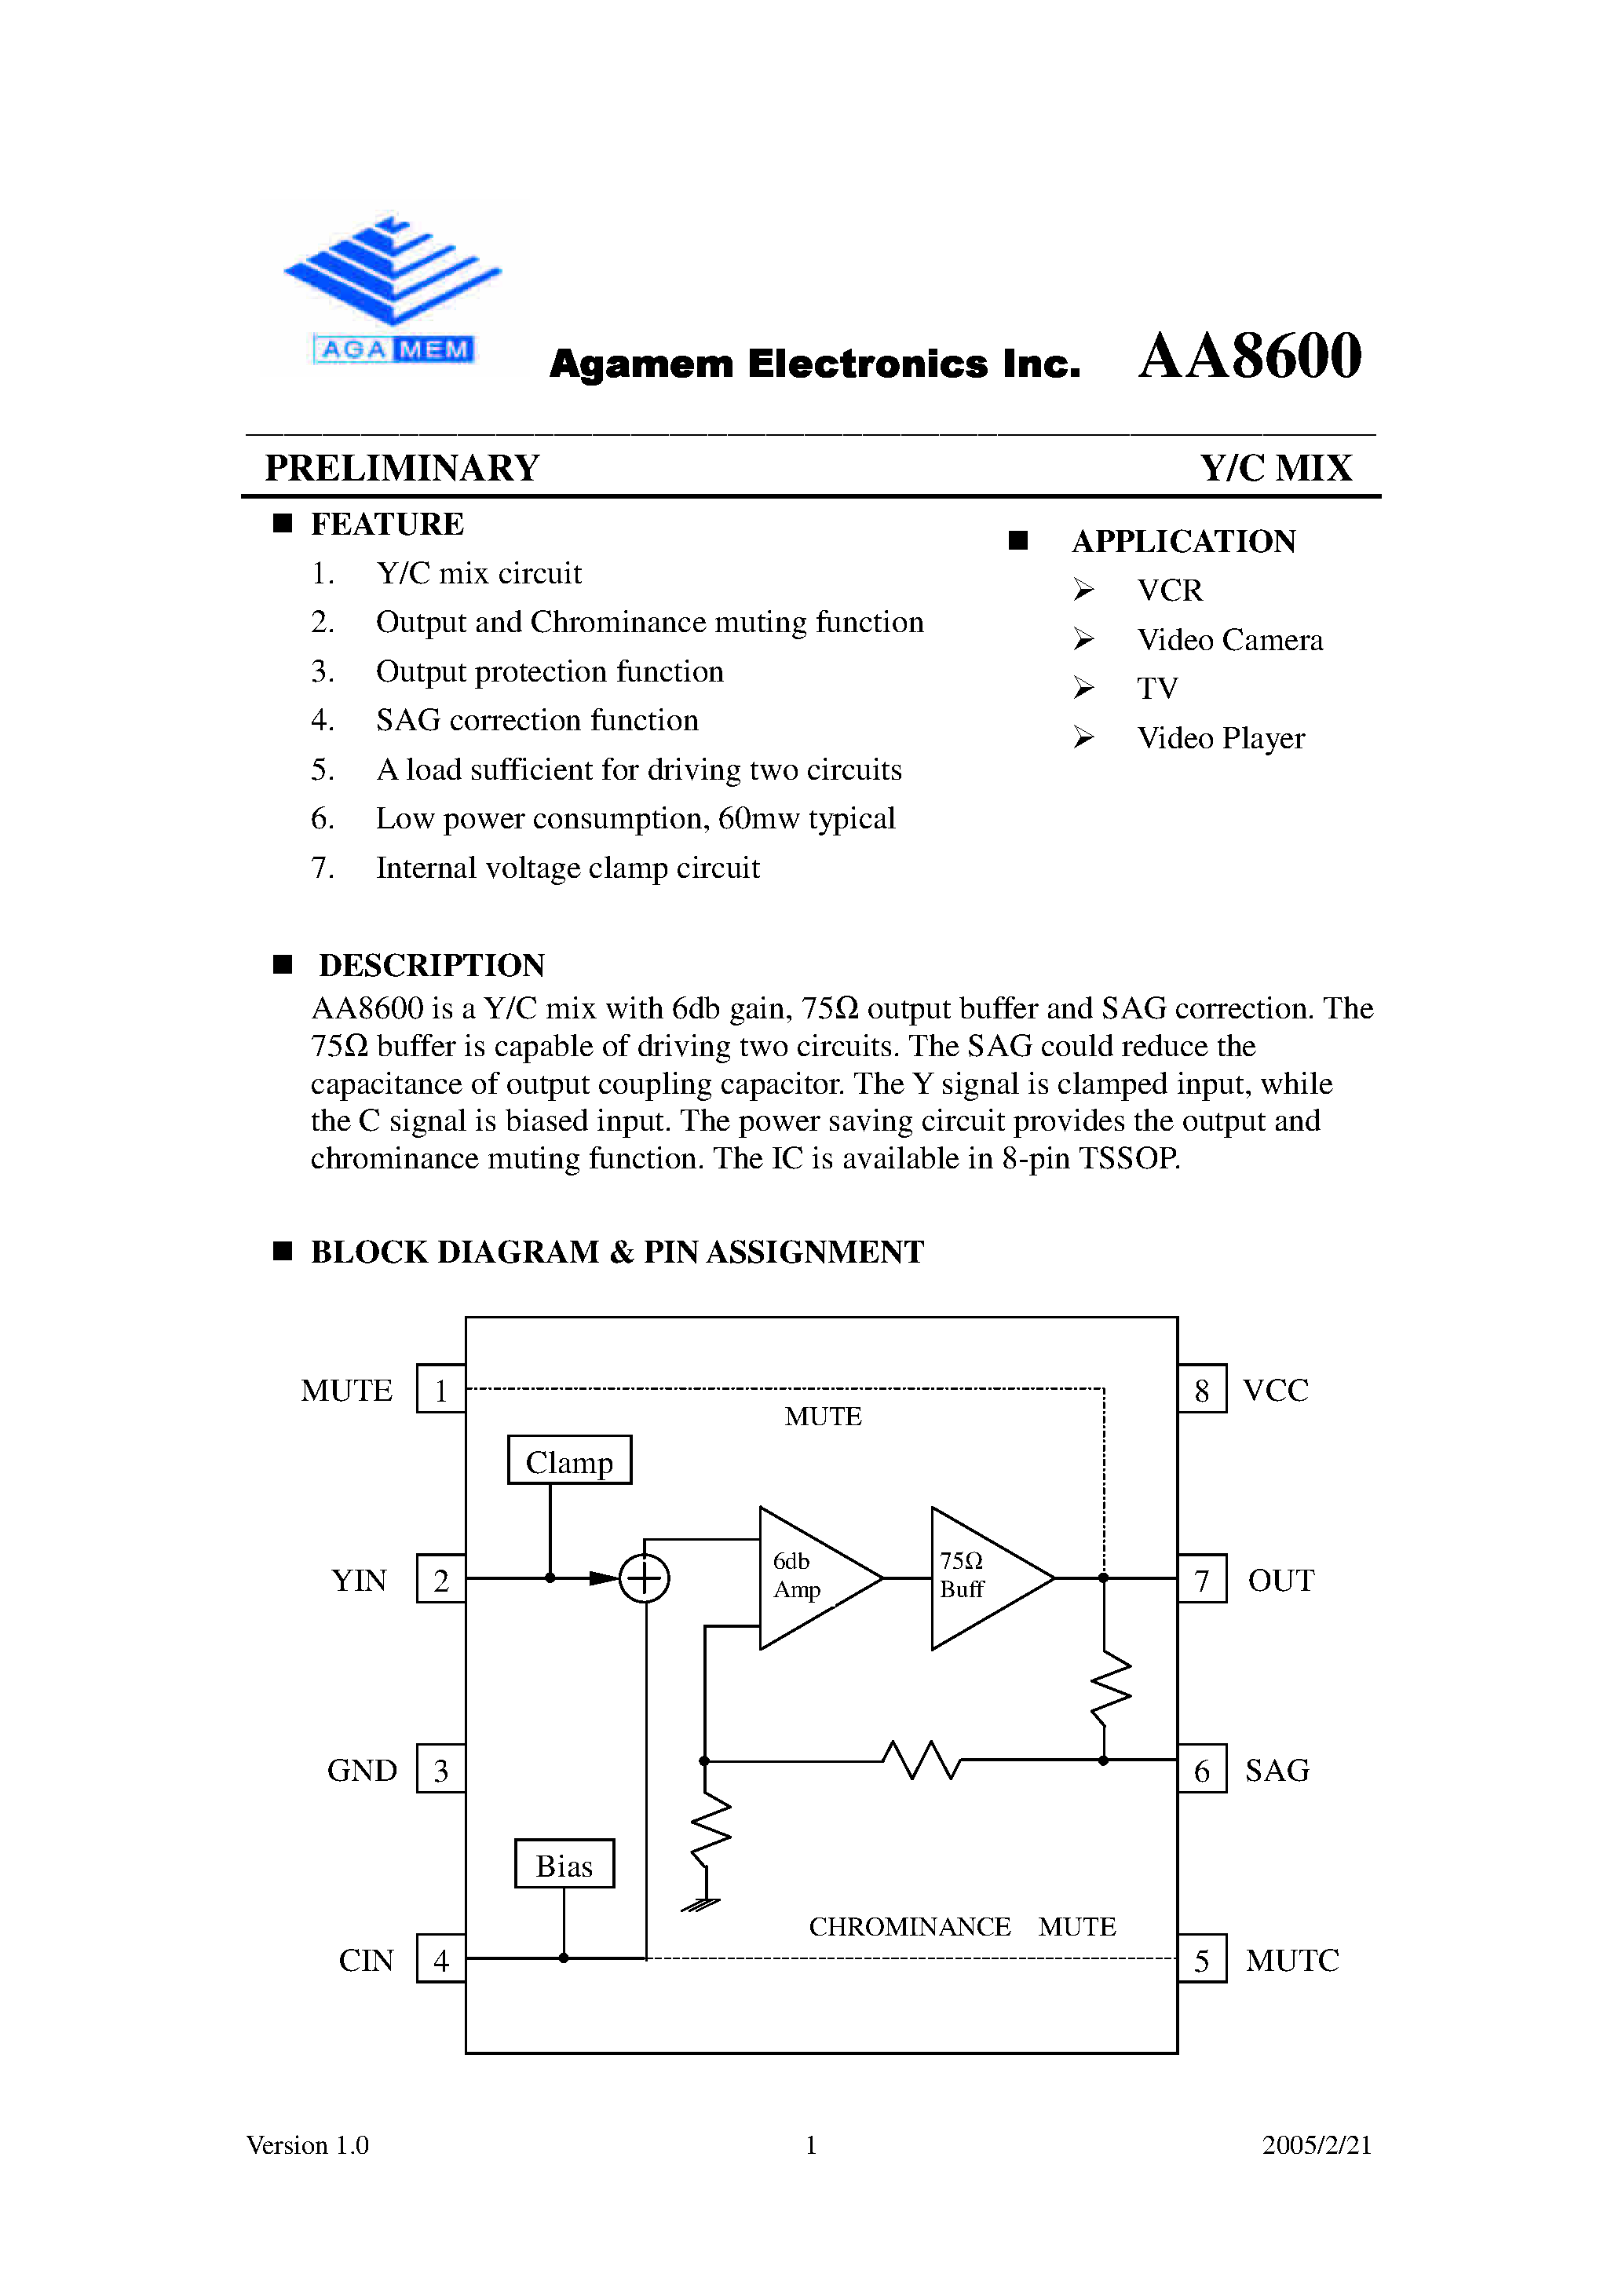 Datasheet AA8600 - Preliminary / Y/C MIX page 1